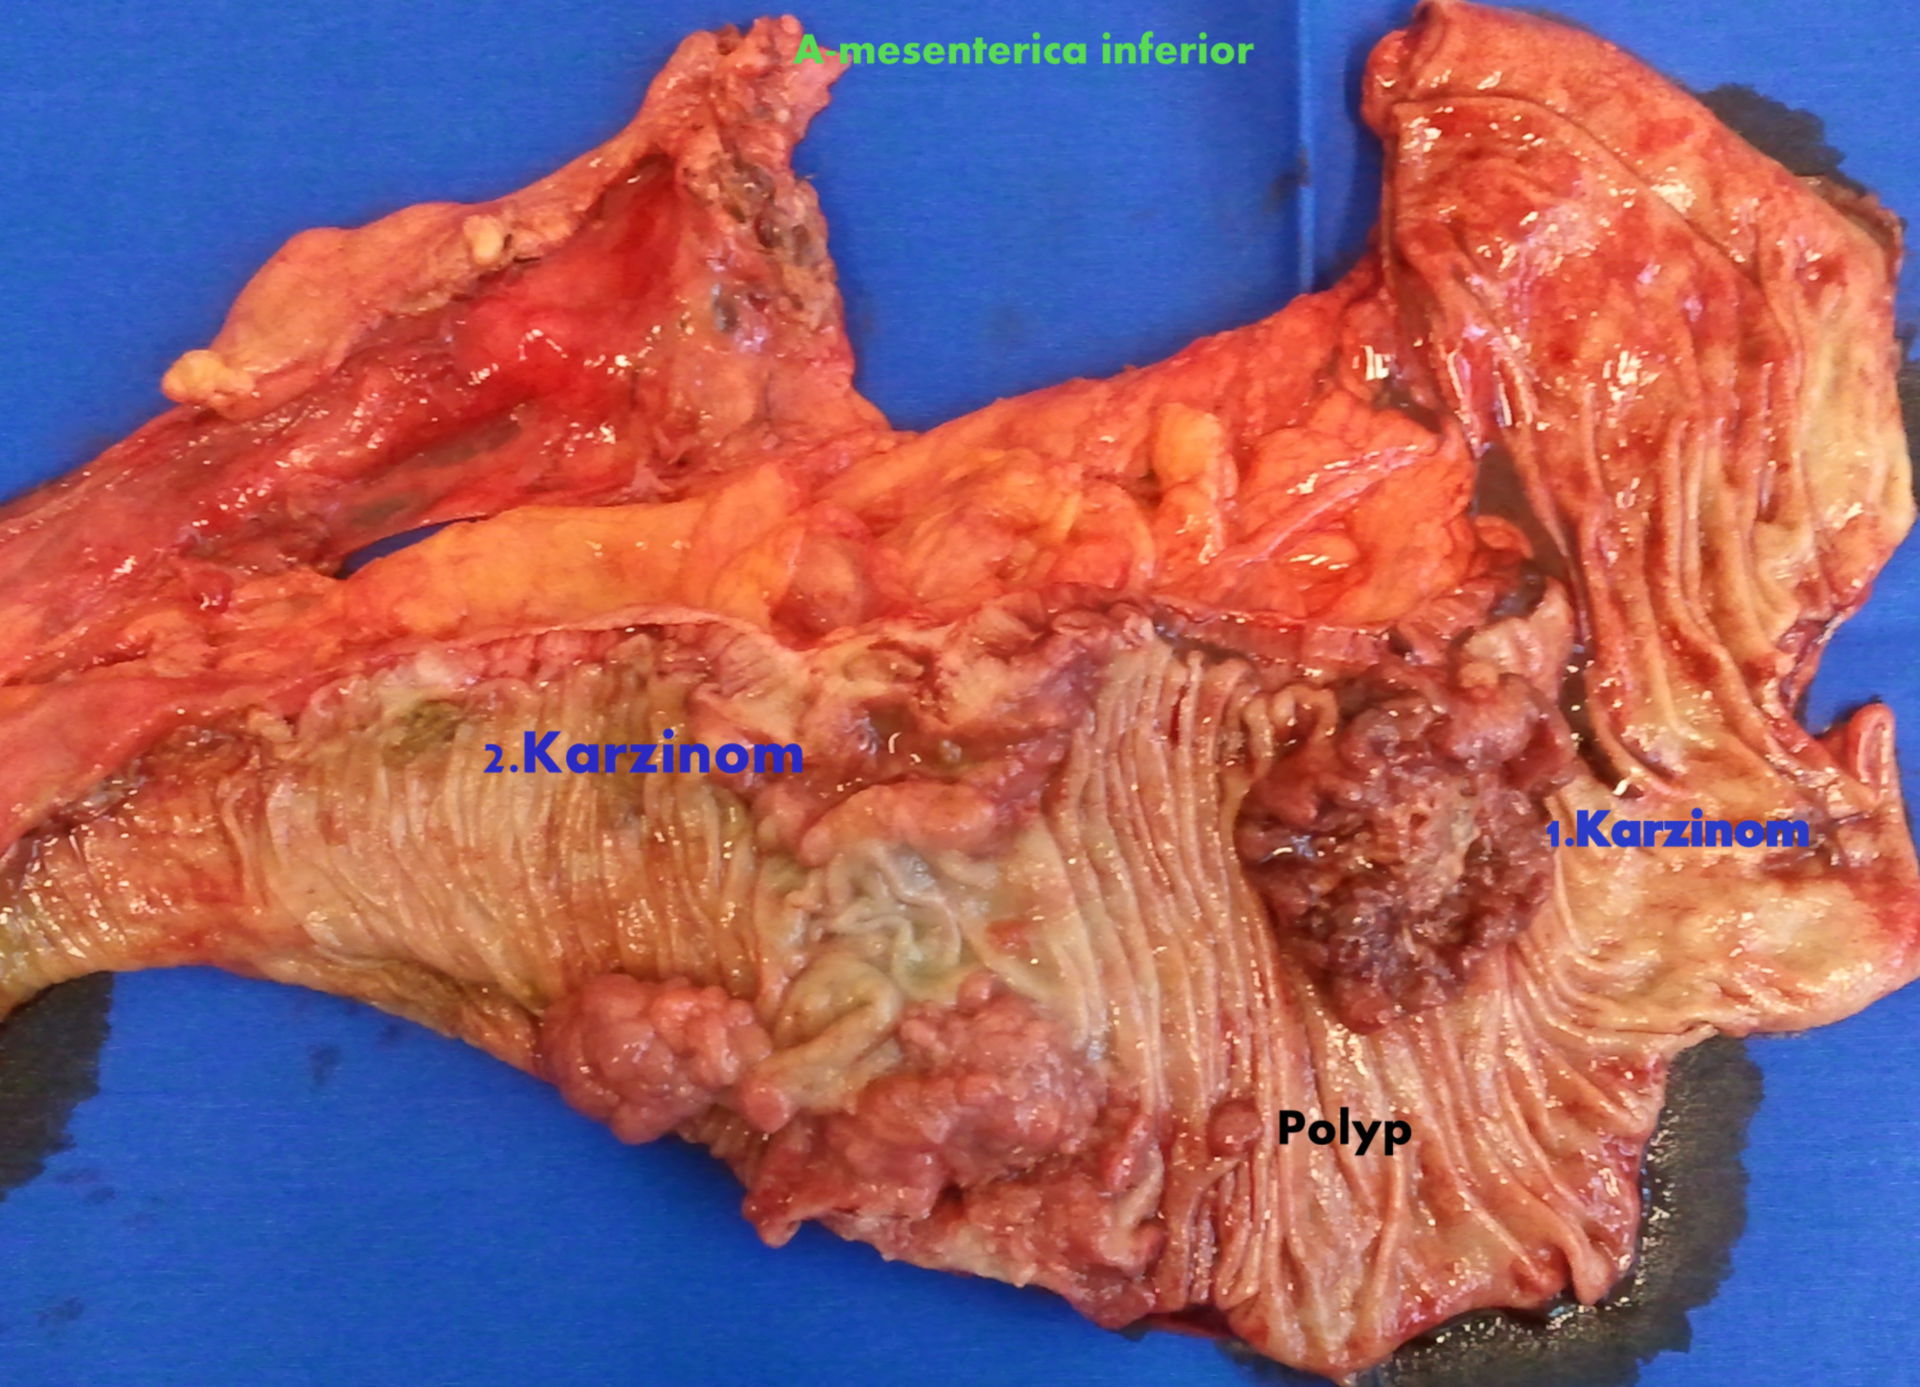 Two synchronous cancers of the sigmoid colon - specimen sliced